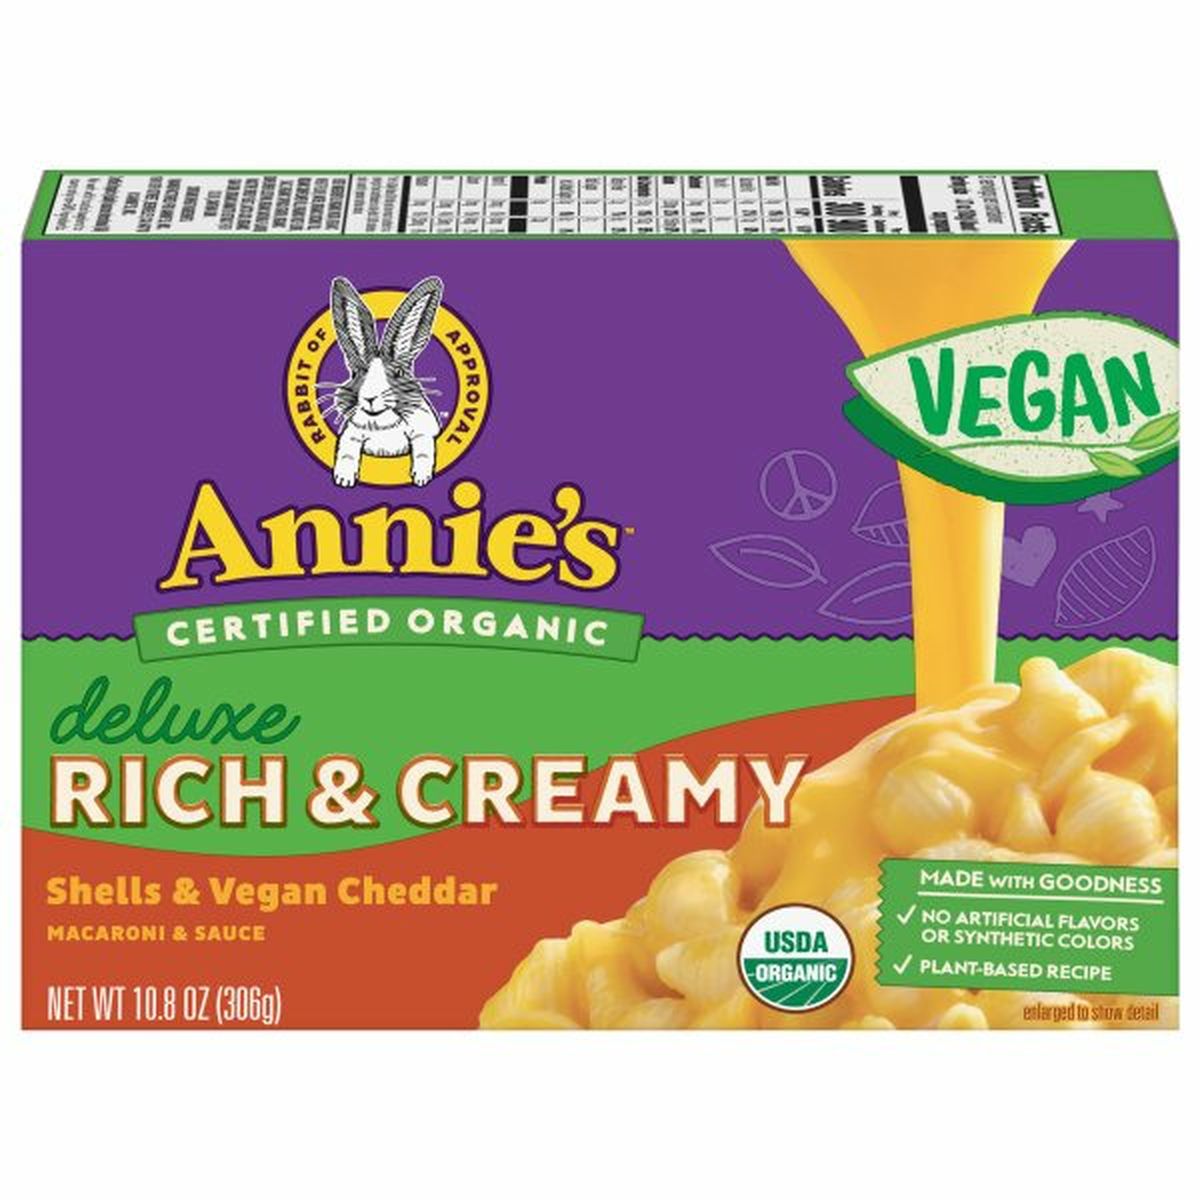 Calories in Annie's Macaroni & Sauce, Deluxe, Rich & Creamy, Shells & Vegan Cheddar